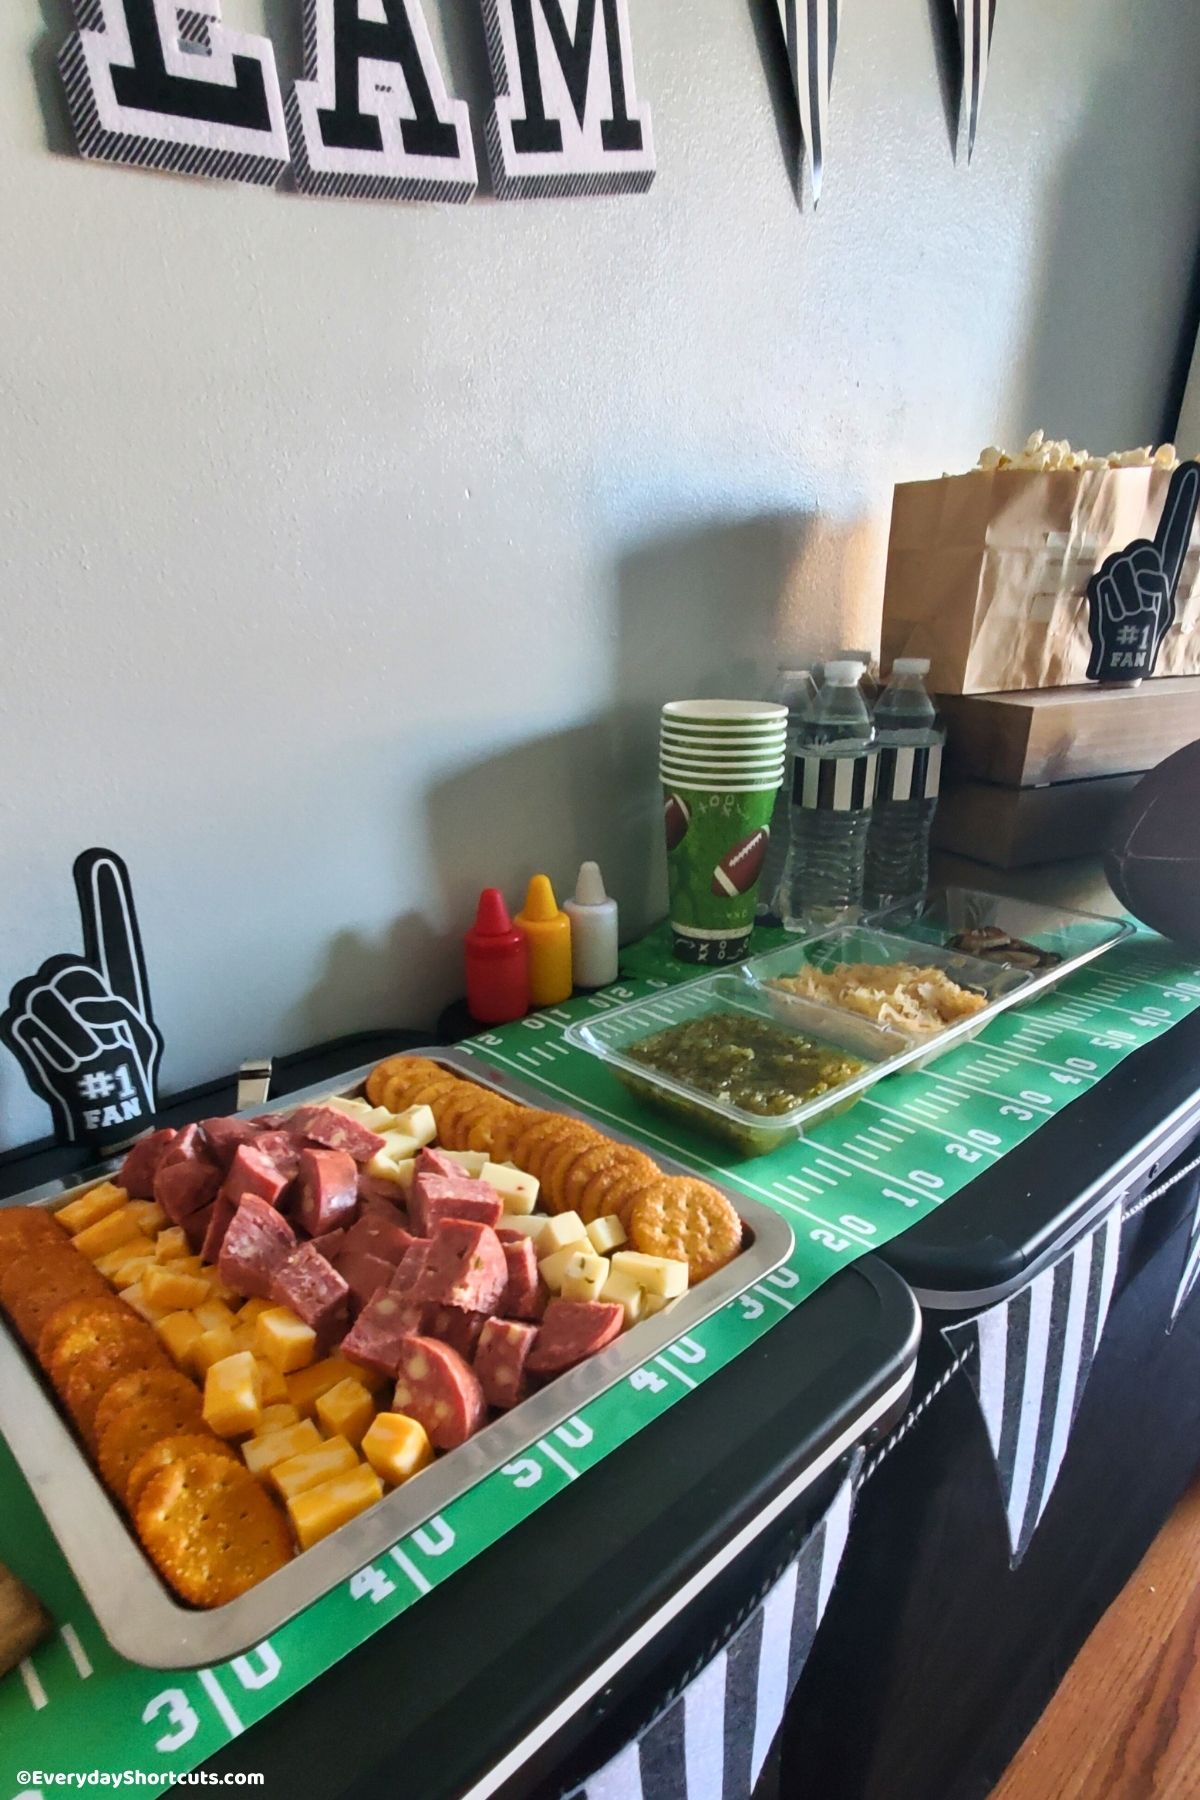 snacks and condiments for football party